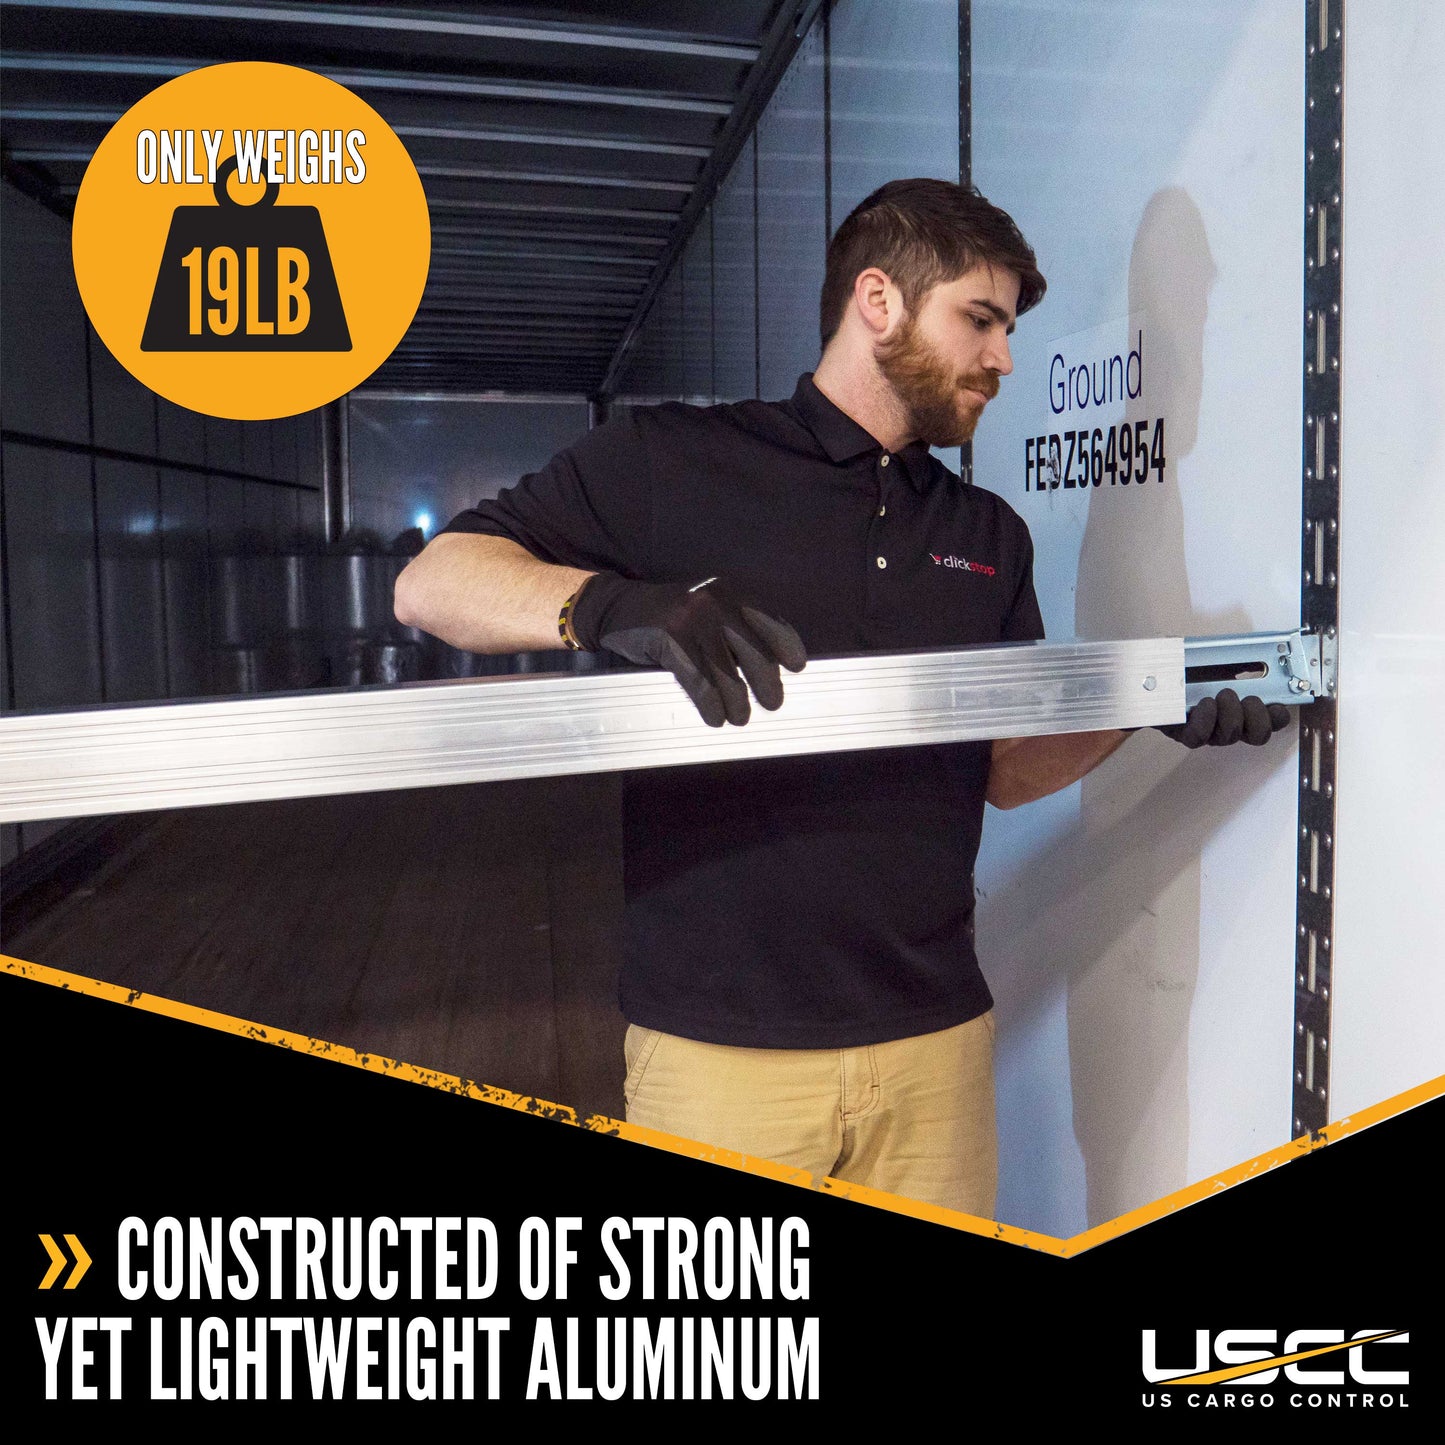 93" Ancra Aluminum Shoring Beam w/ Patented Locking Ends:  Extends to 103"